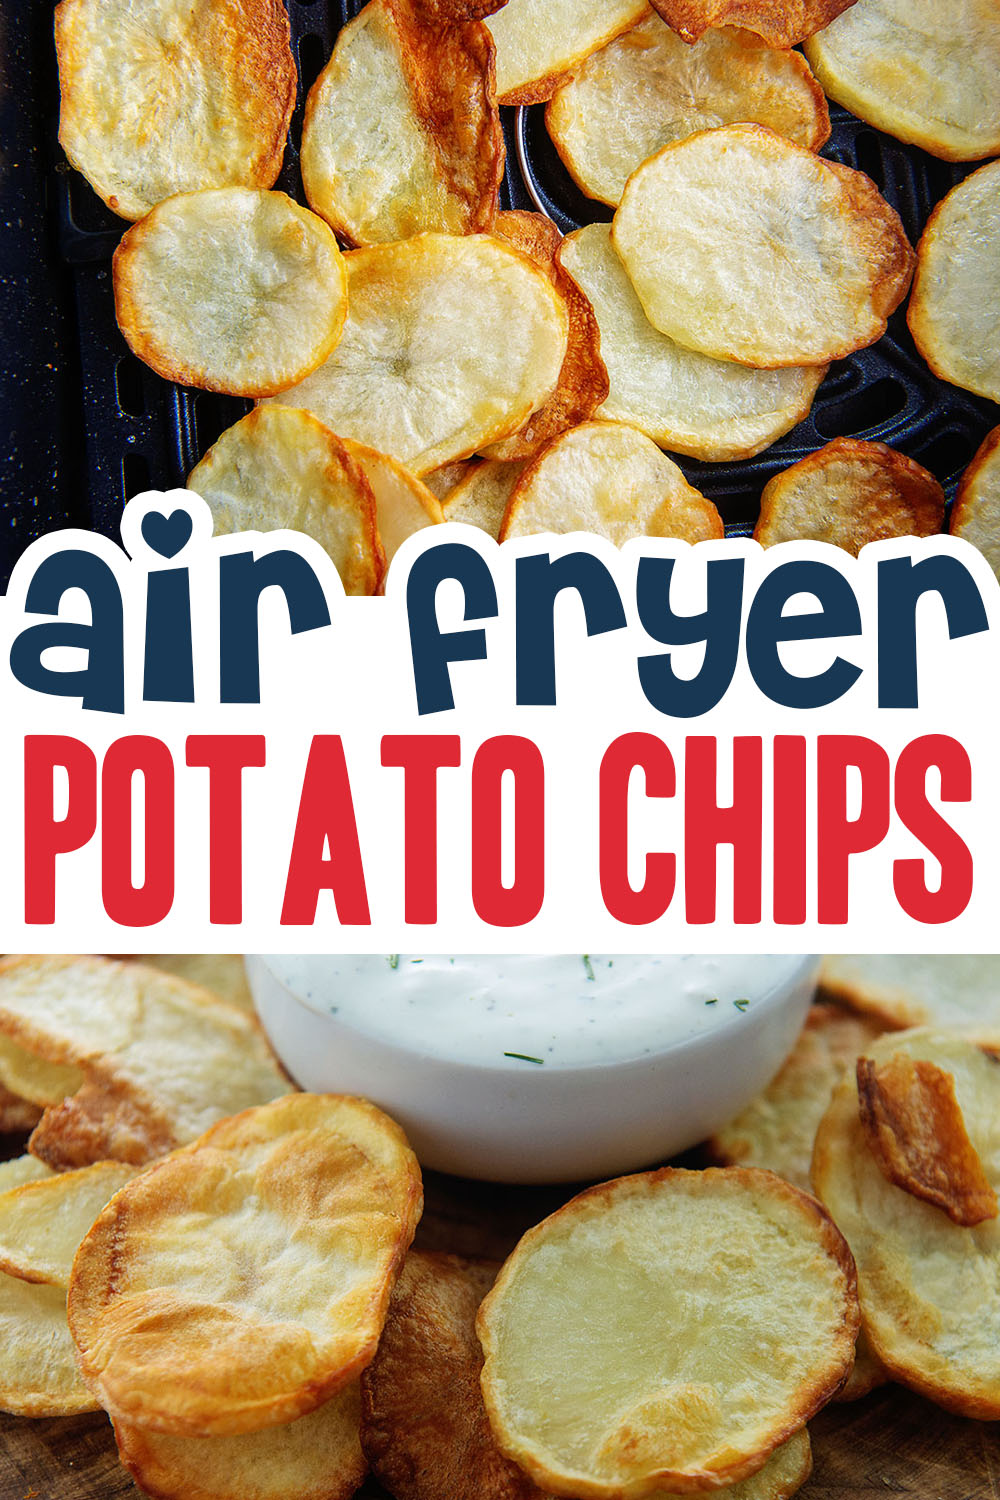 These AIR FRYER POTATO CHIPS turn out perfectly crispy and ready for dipping in no time thanks to the air fryer. So much easier and healthier than deep frying, but you won't miss out on any of the delicious flavor!